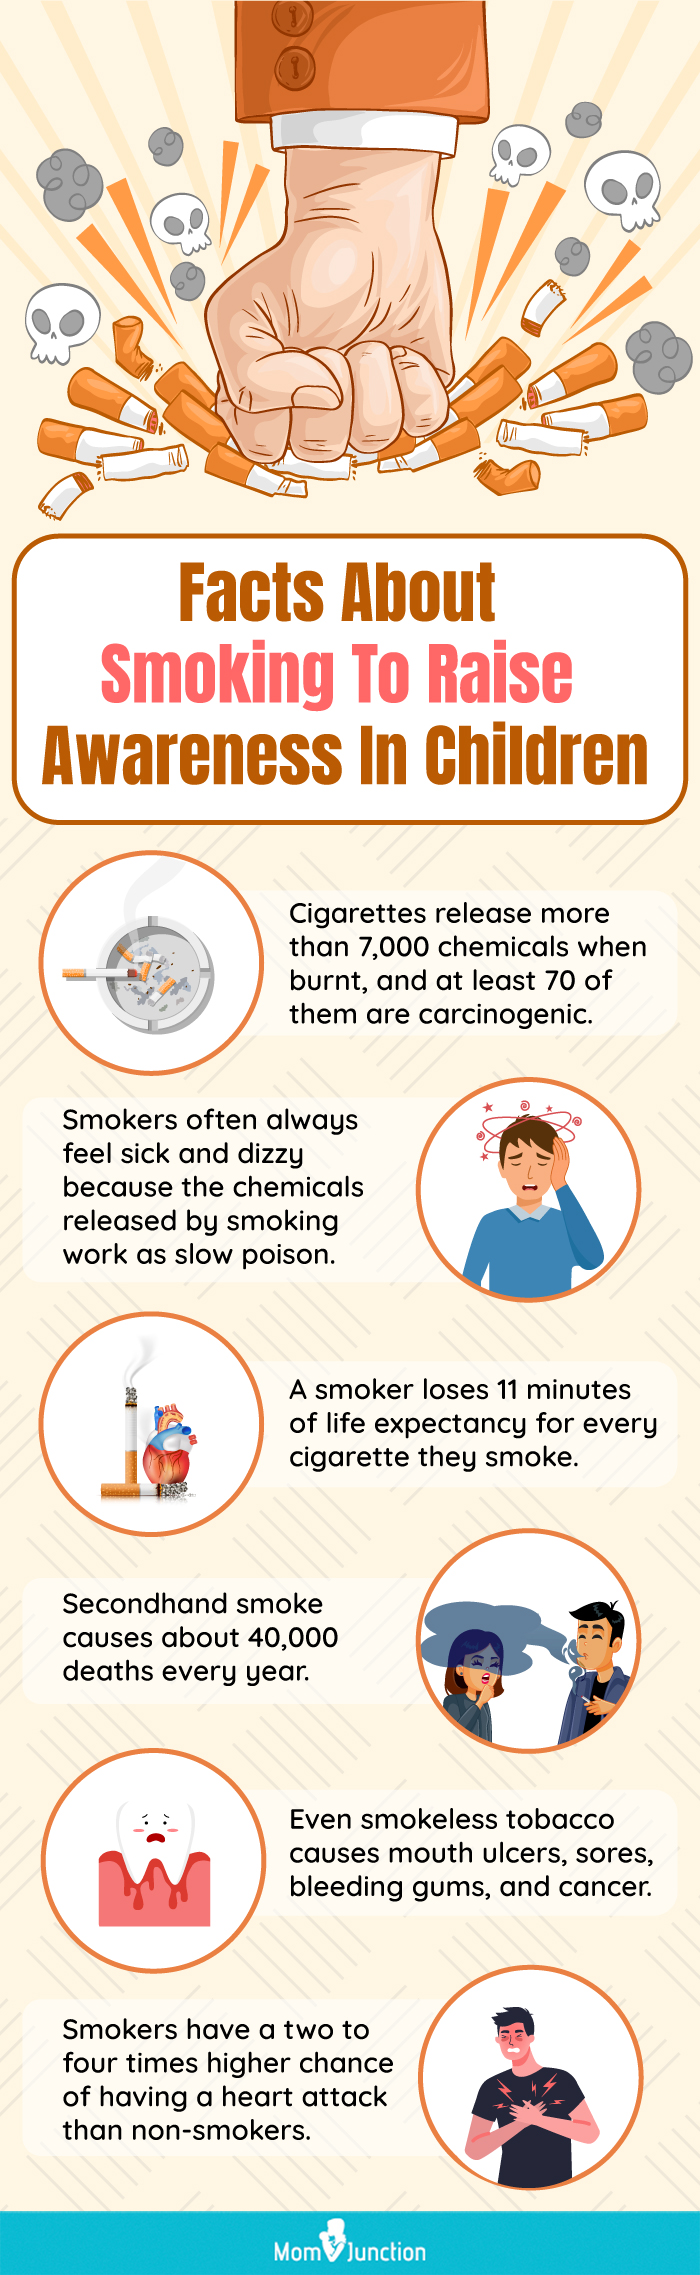 facts about smoking to raise awareness in children (infographic)